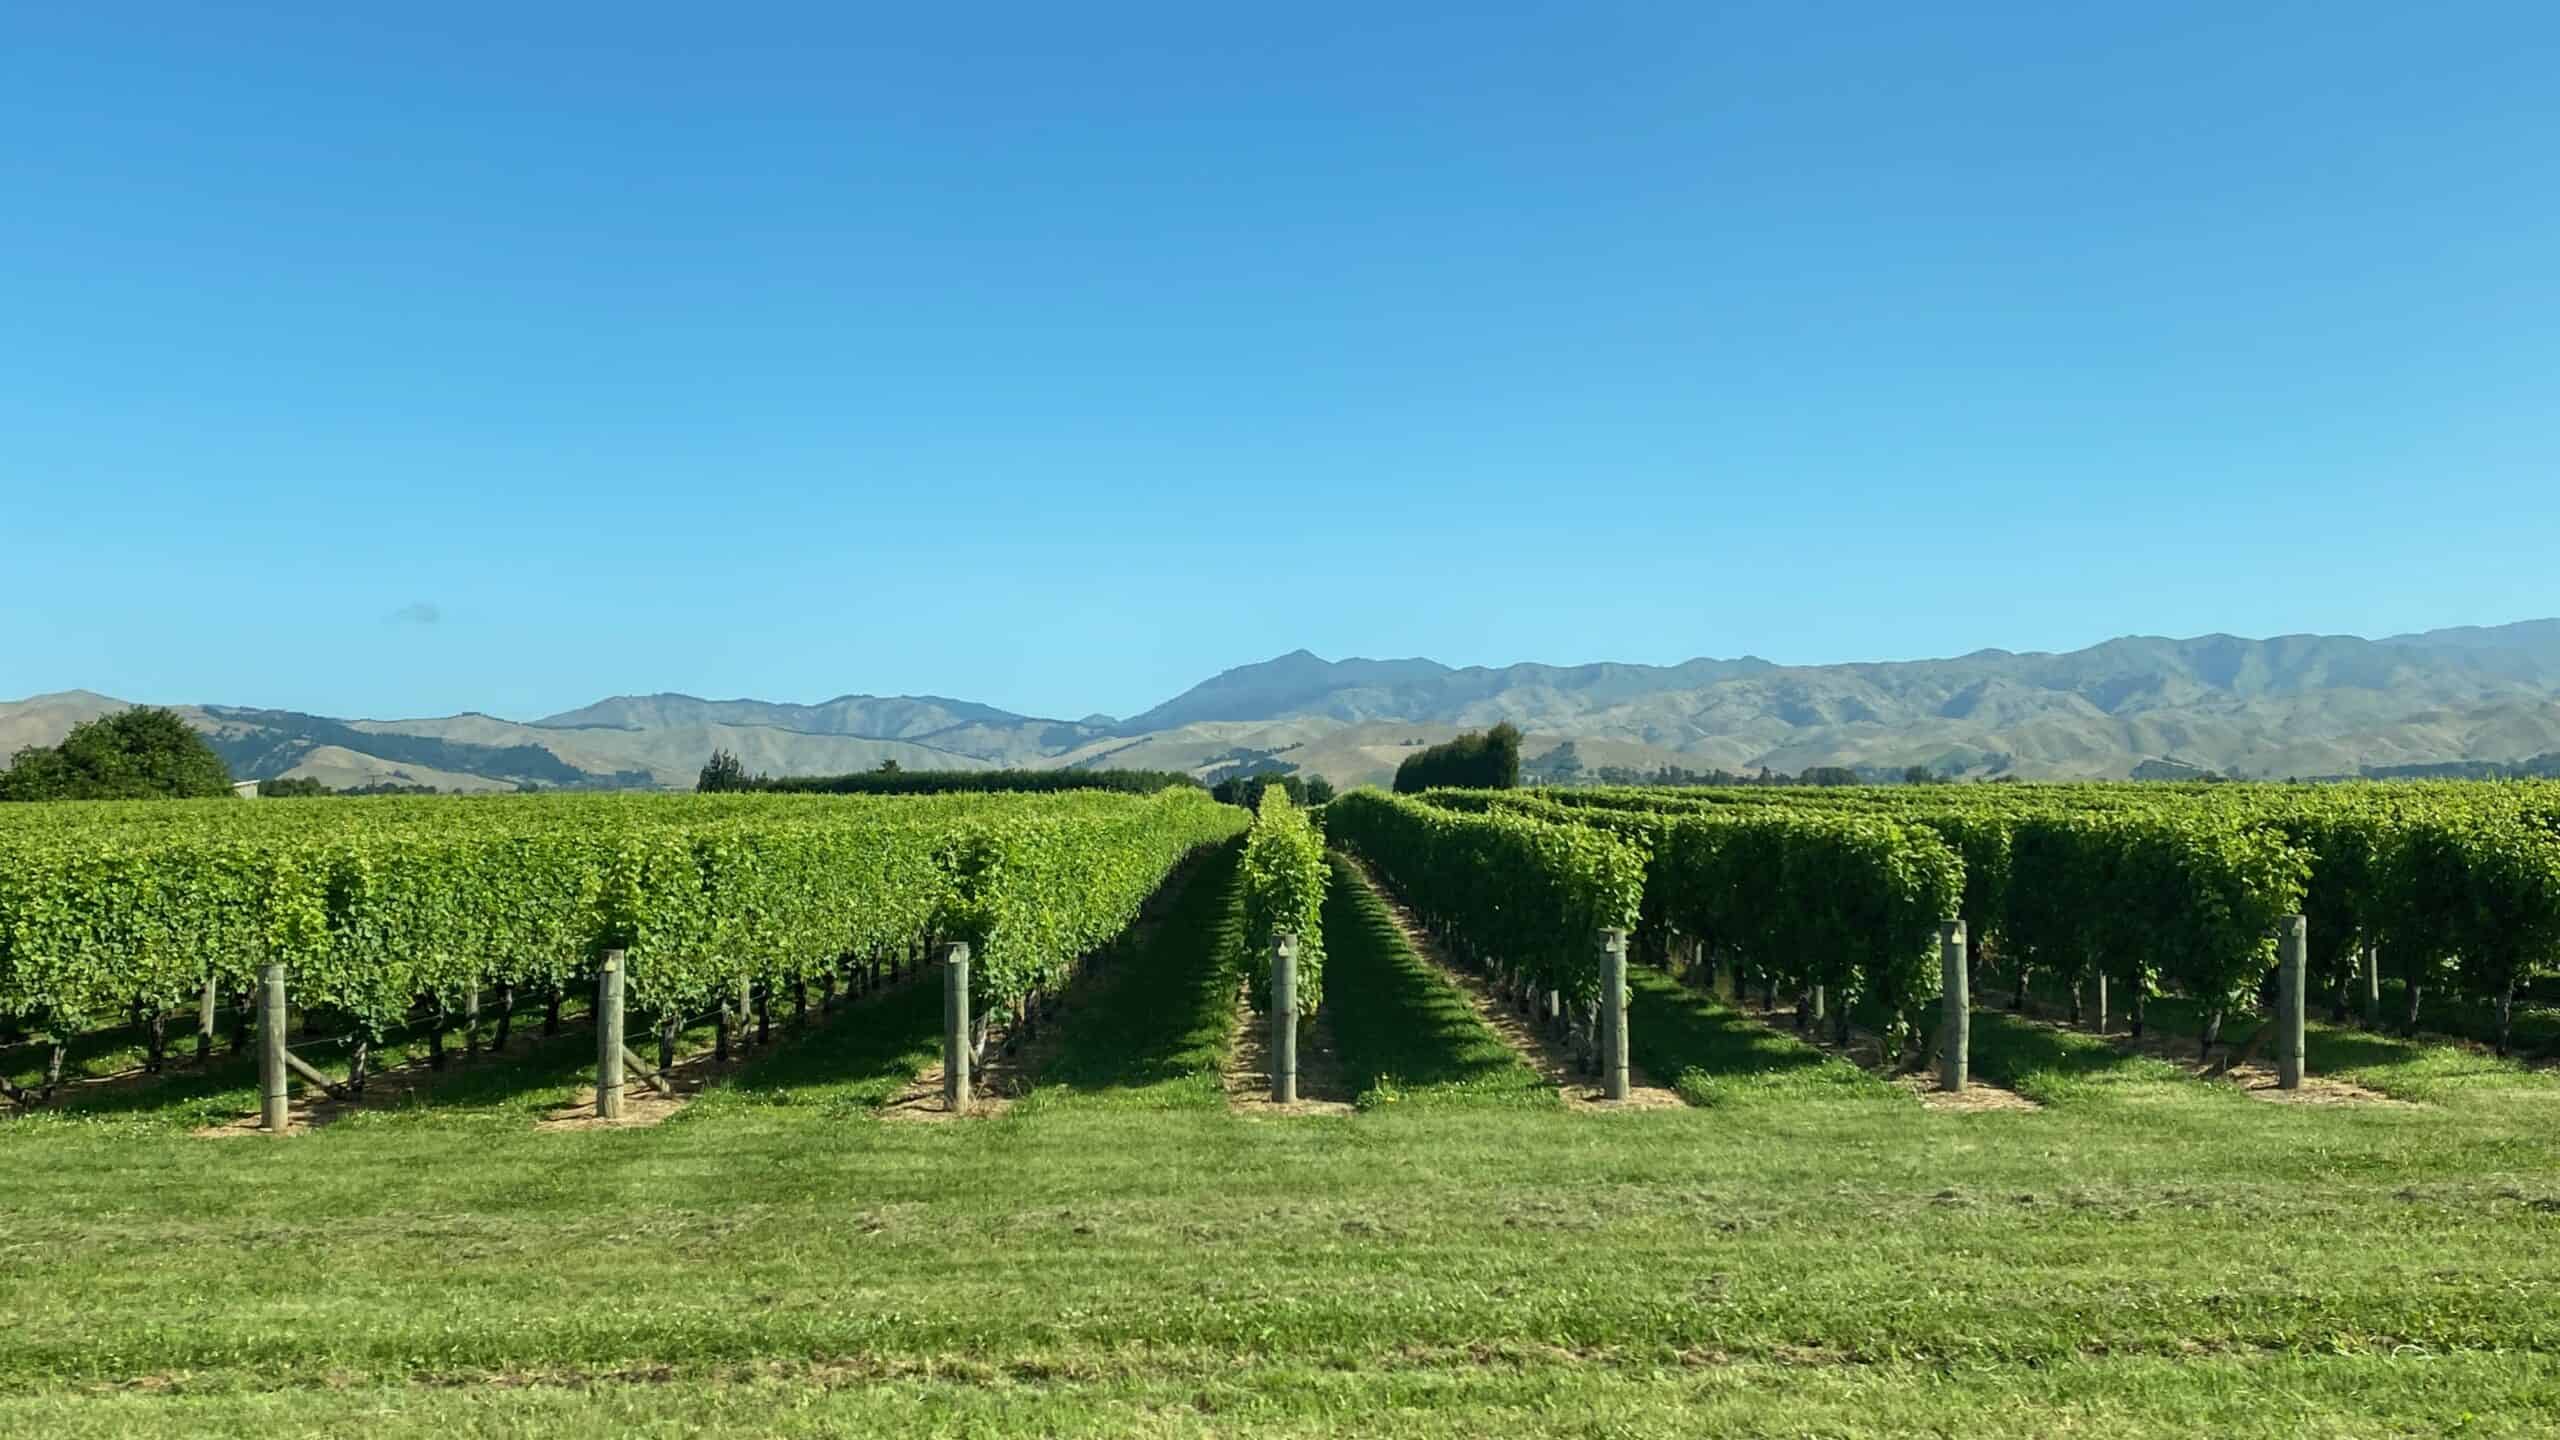 The Sauvignon Blanc grapes are the most popular wine in New Zealand